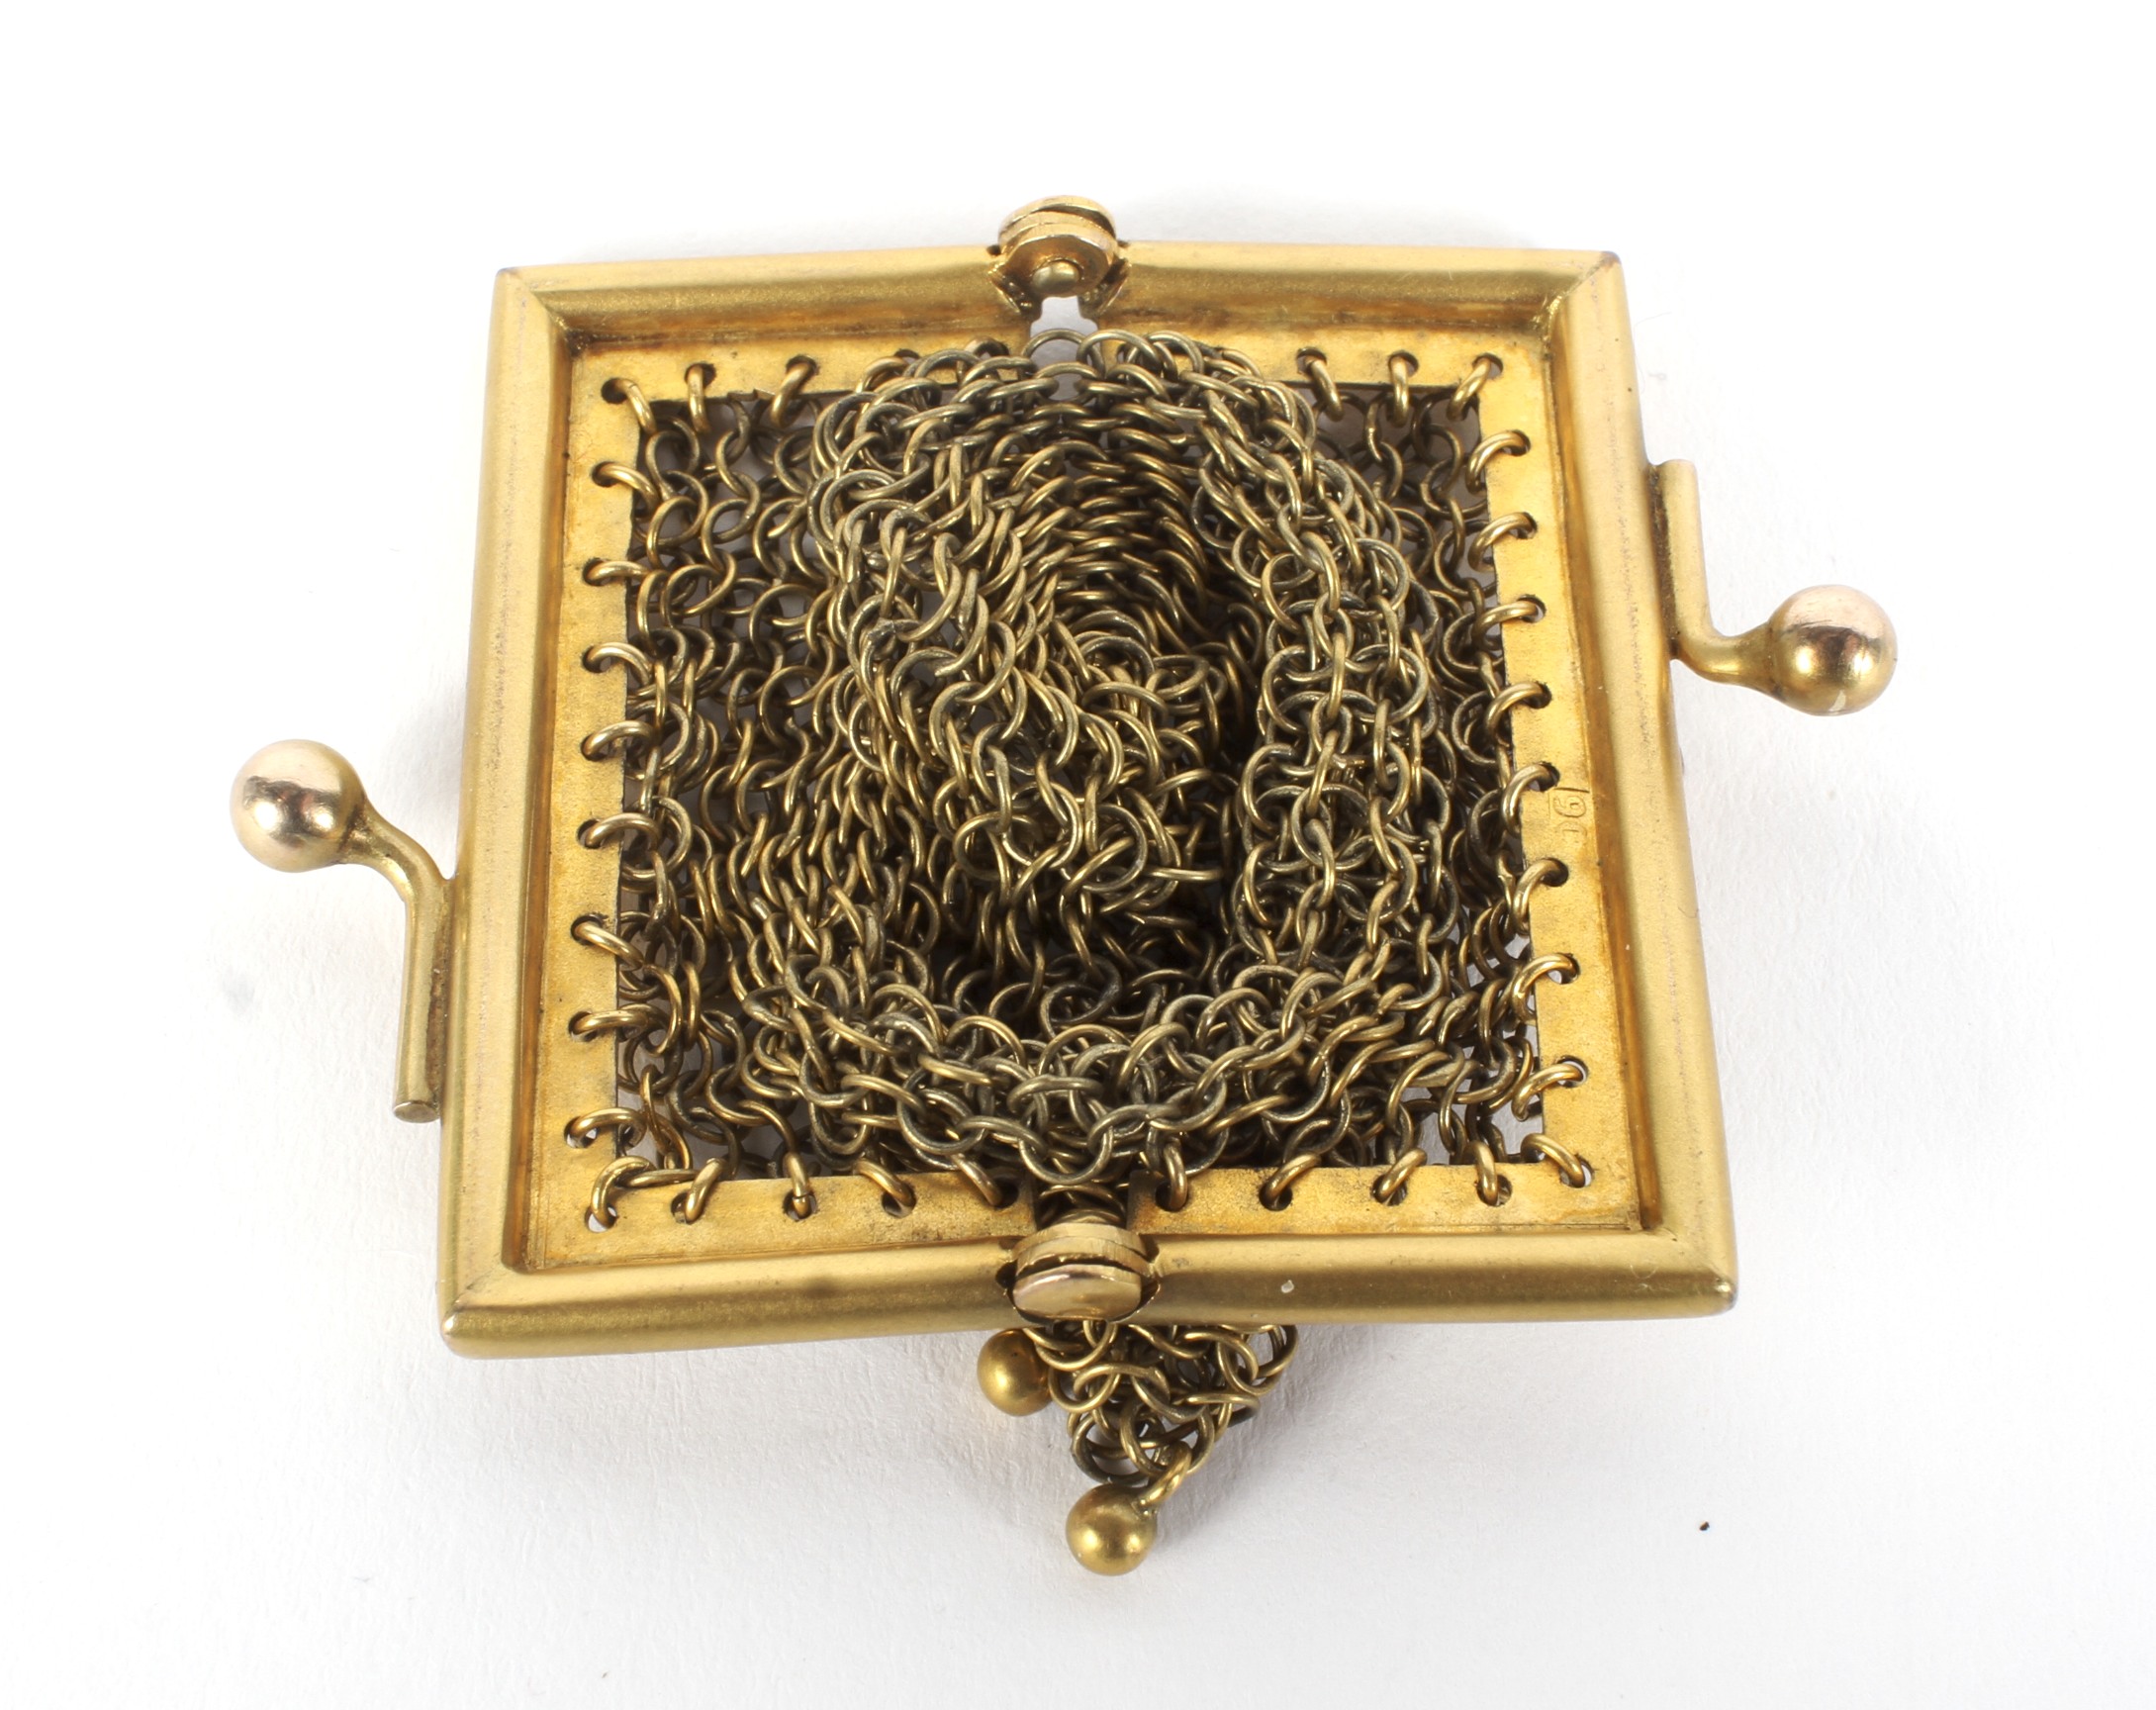 An early 20th century gold mesh sovereign or miser's purse. - Image 2 of 2